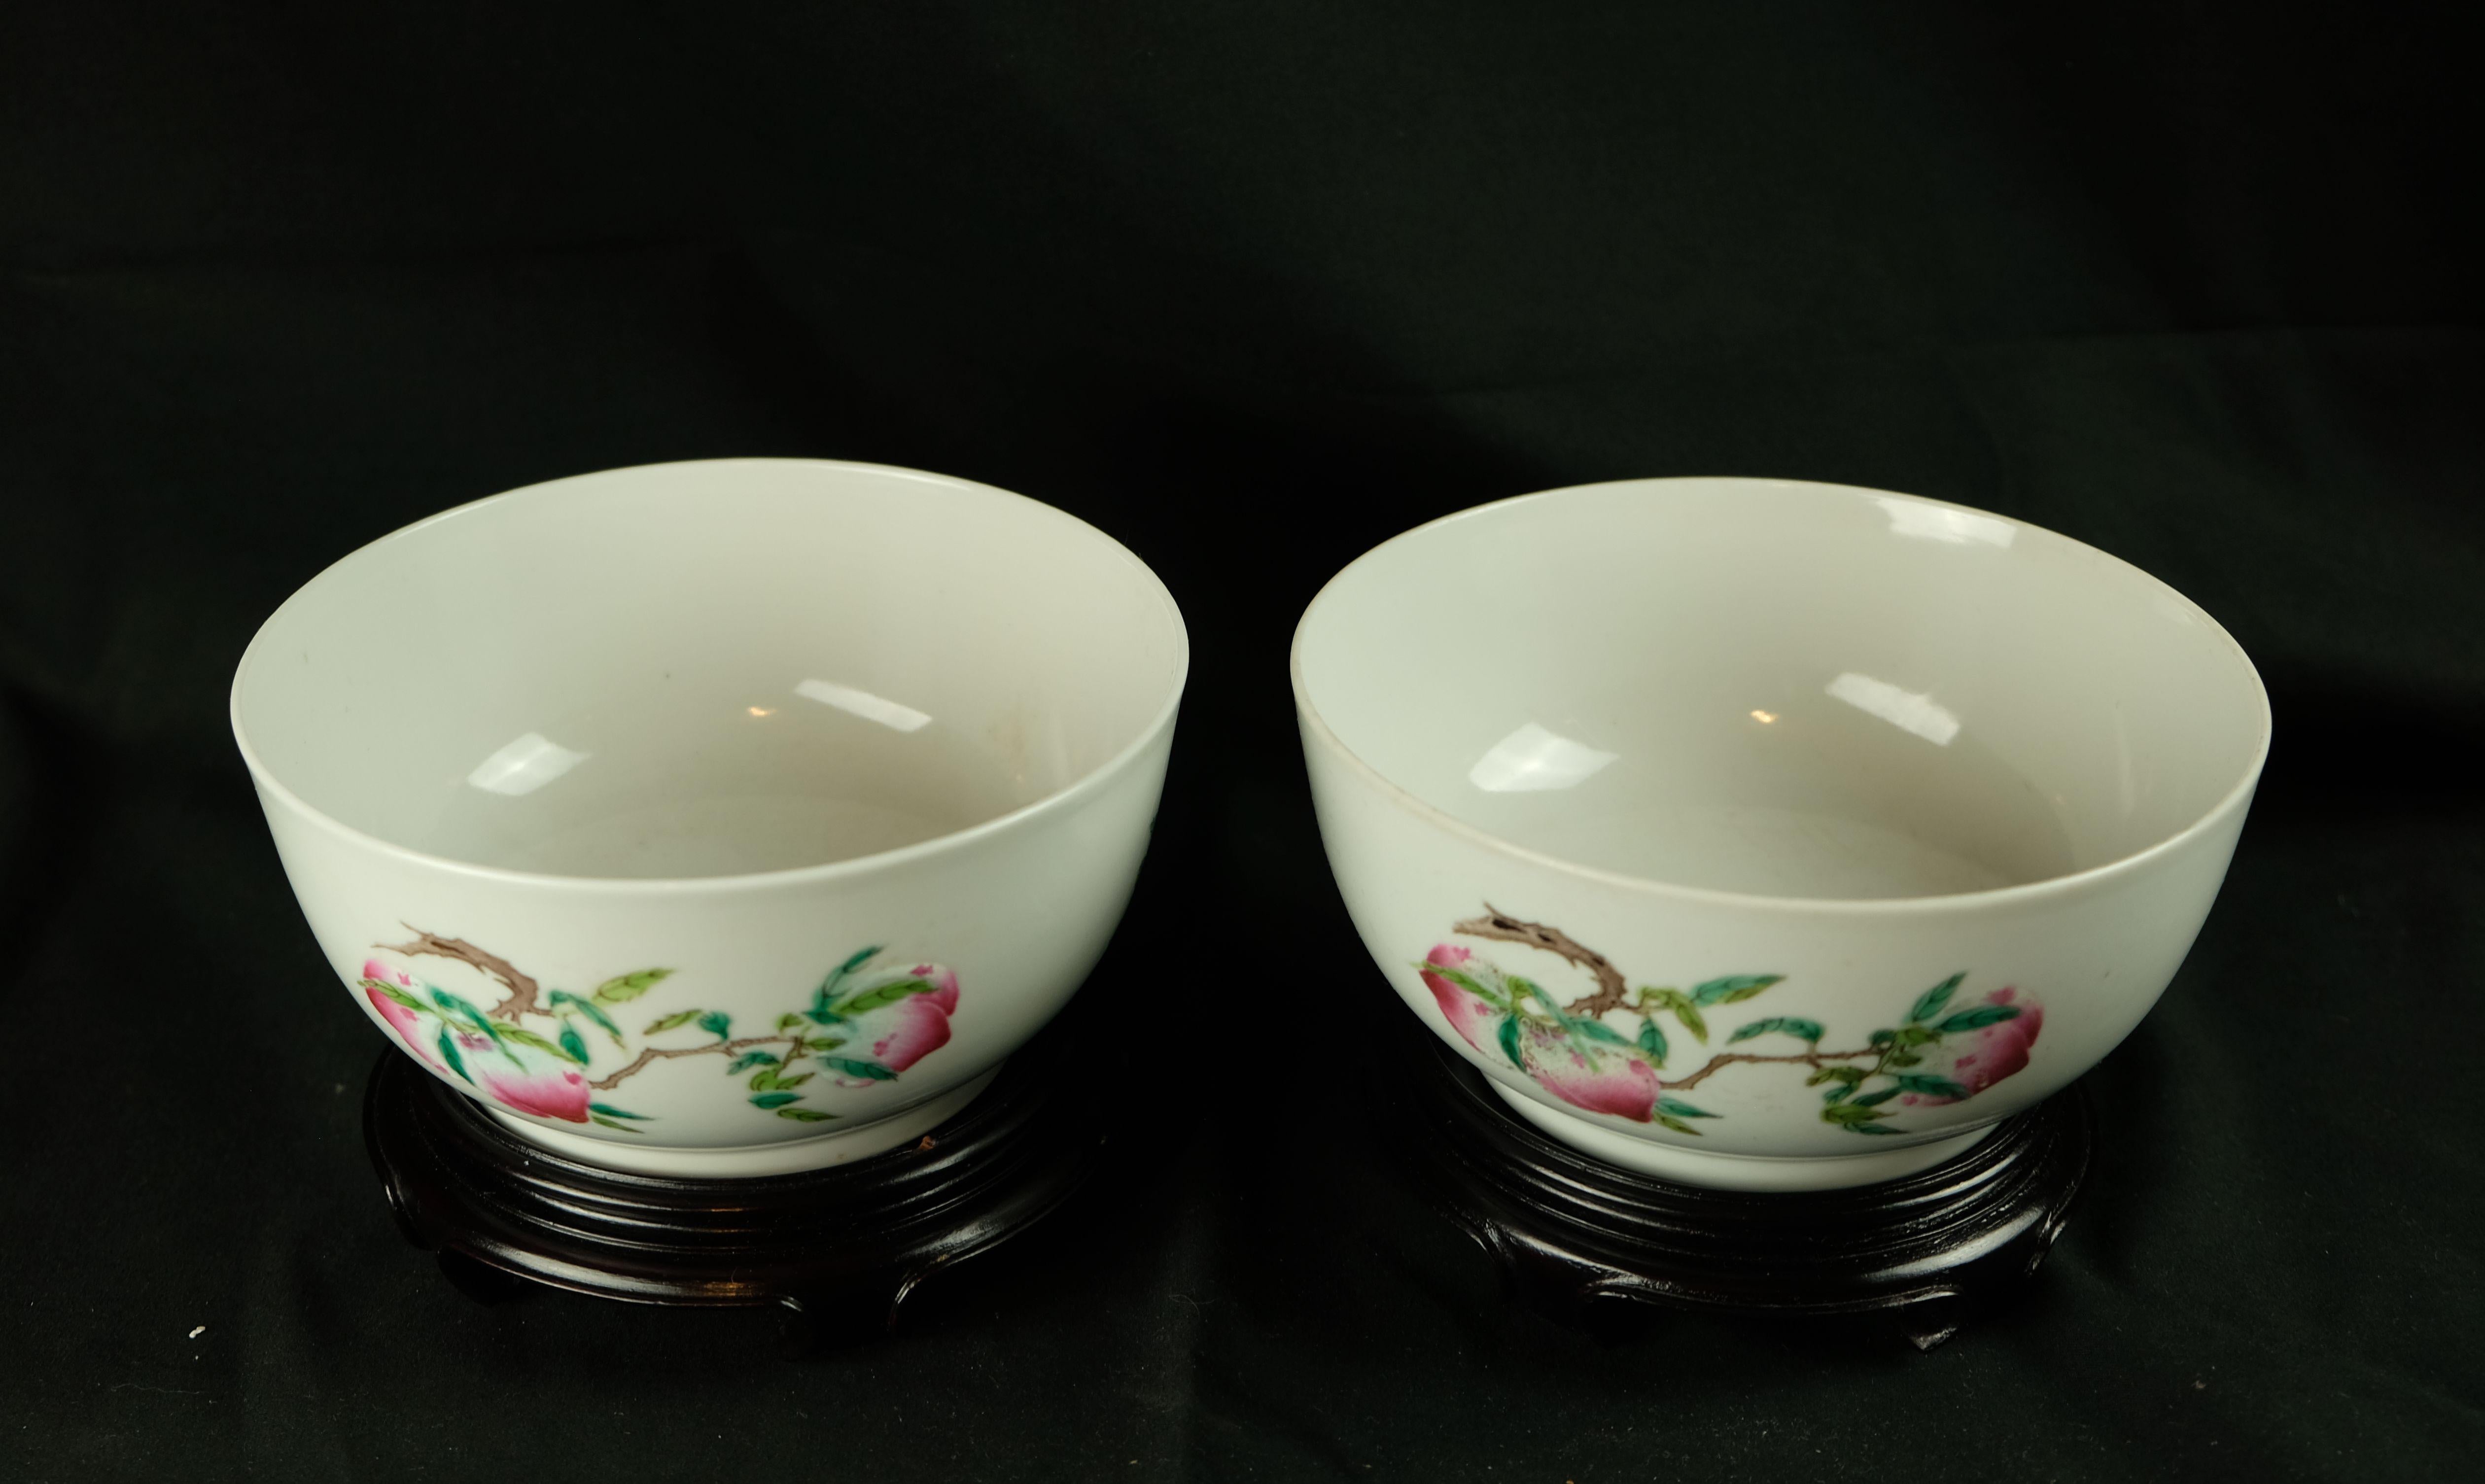 Antique Pair of Famille Rose Sanduo Bowls, 19th Century In Excellent Condition For Sale In Norton, MA